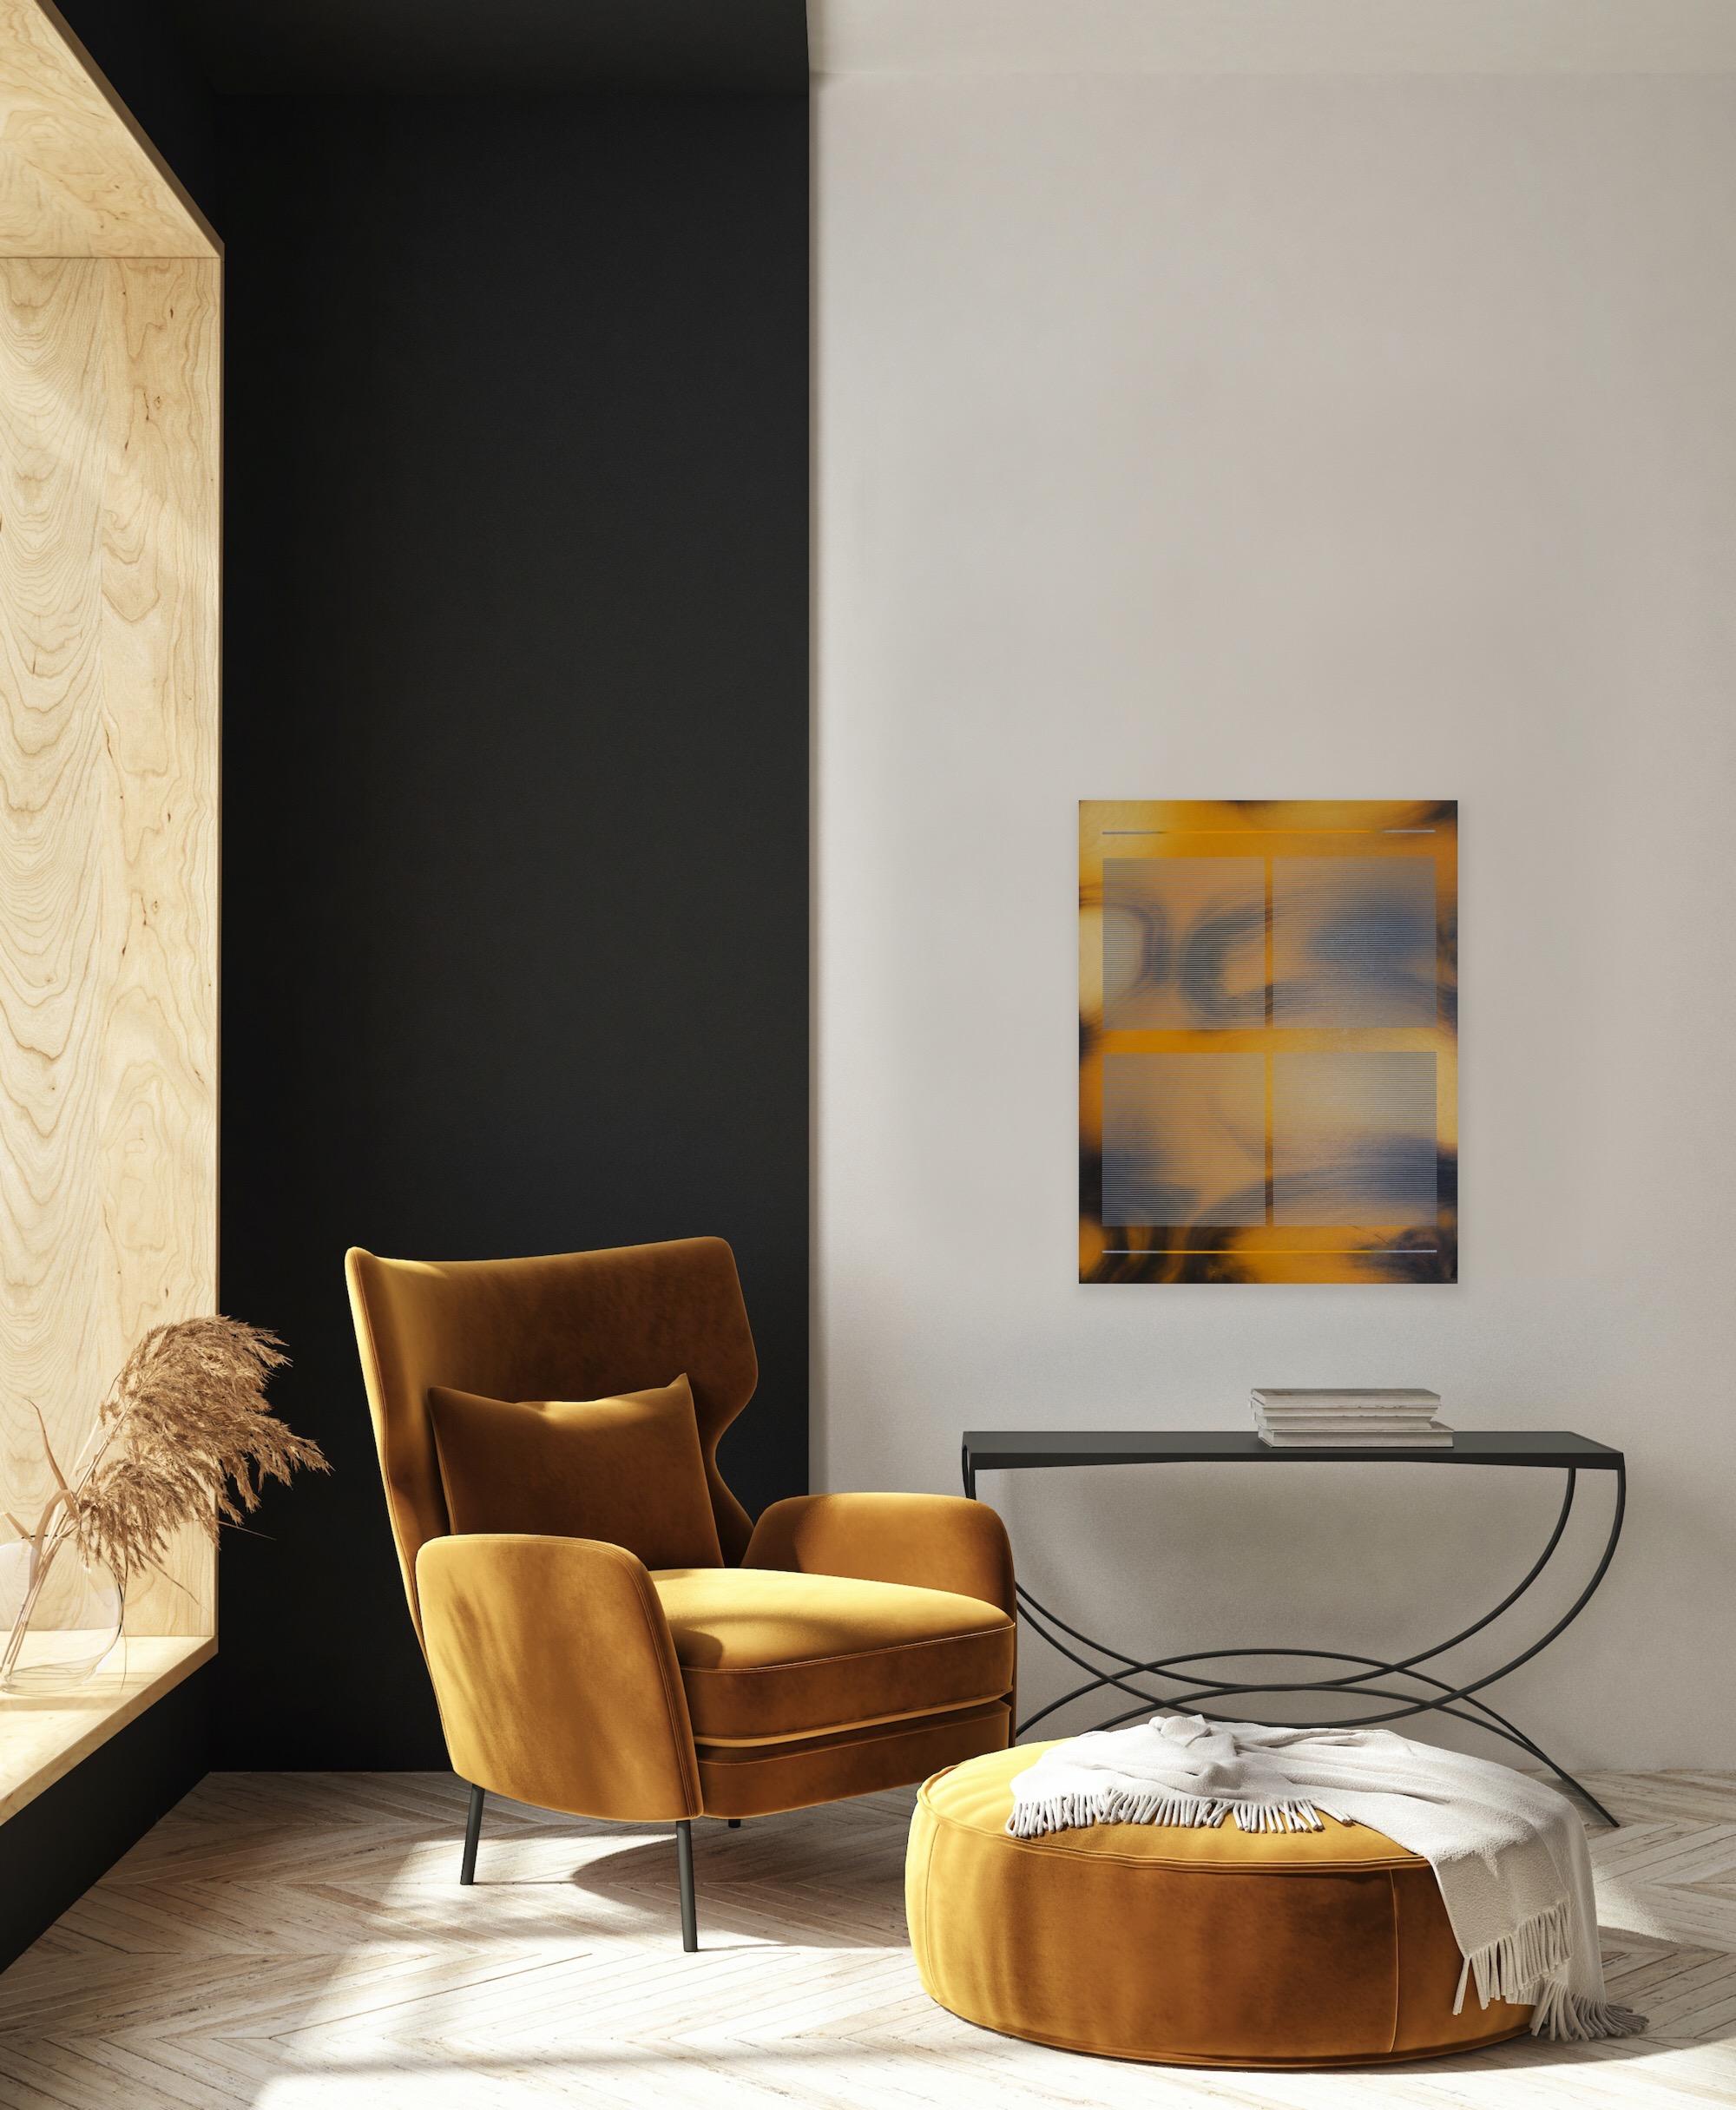 CSW 2024.7 (sun ray yellow golden hour amber rythms sound waves grid painting) For Sale 3